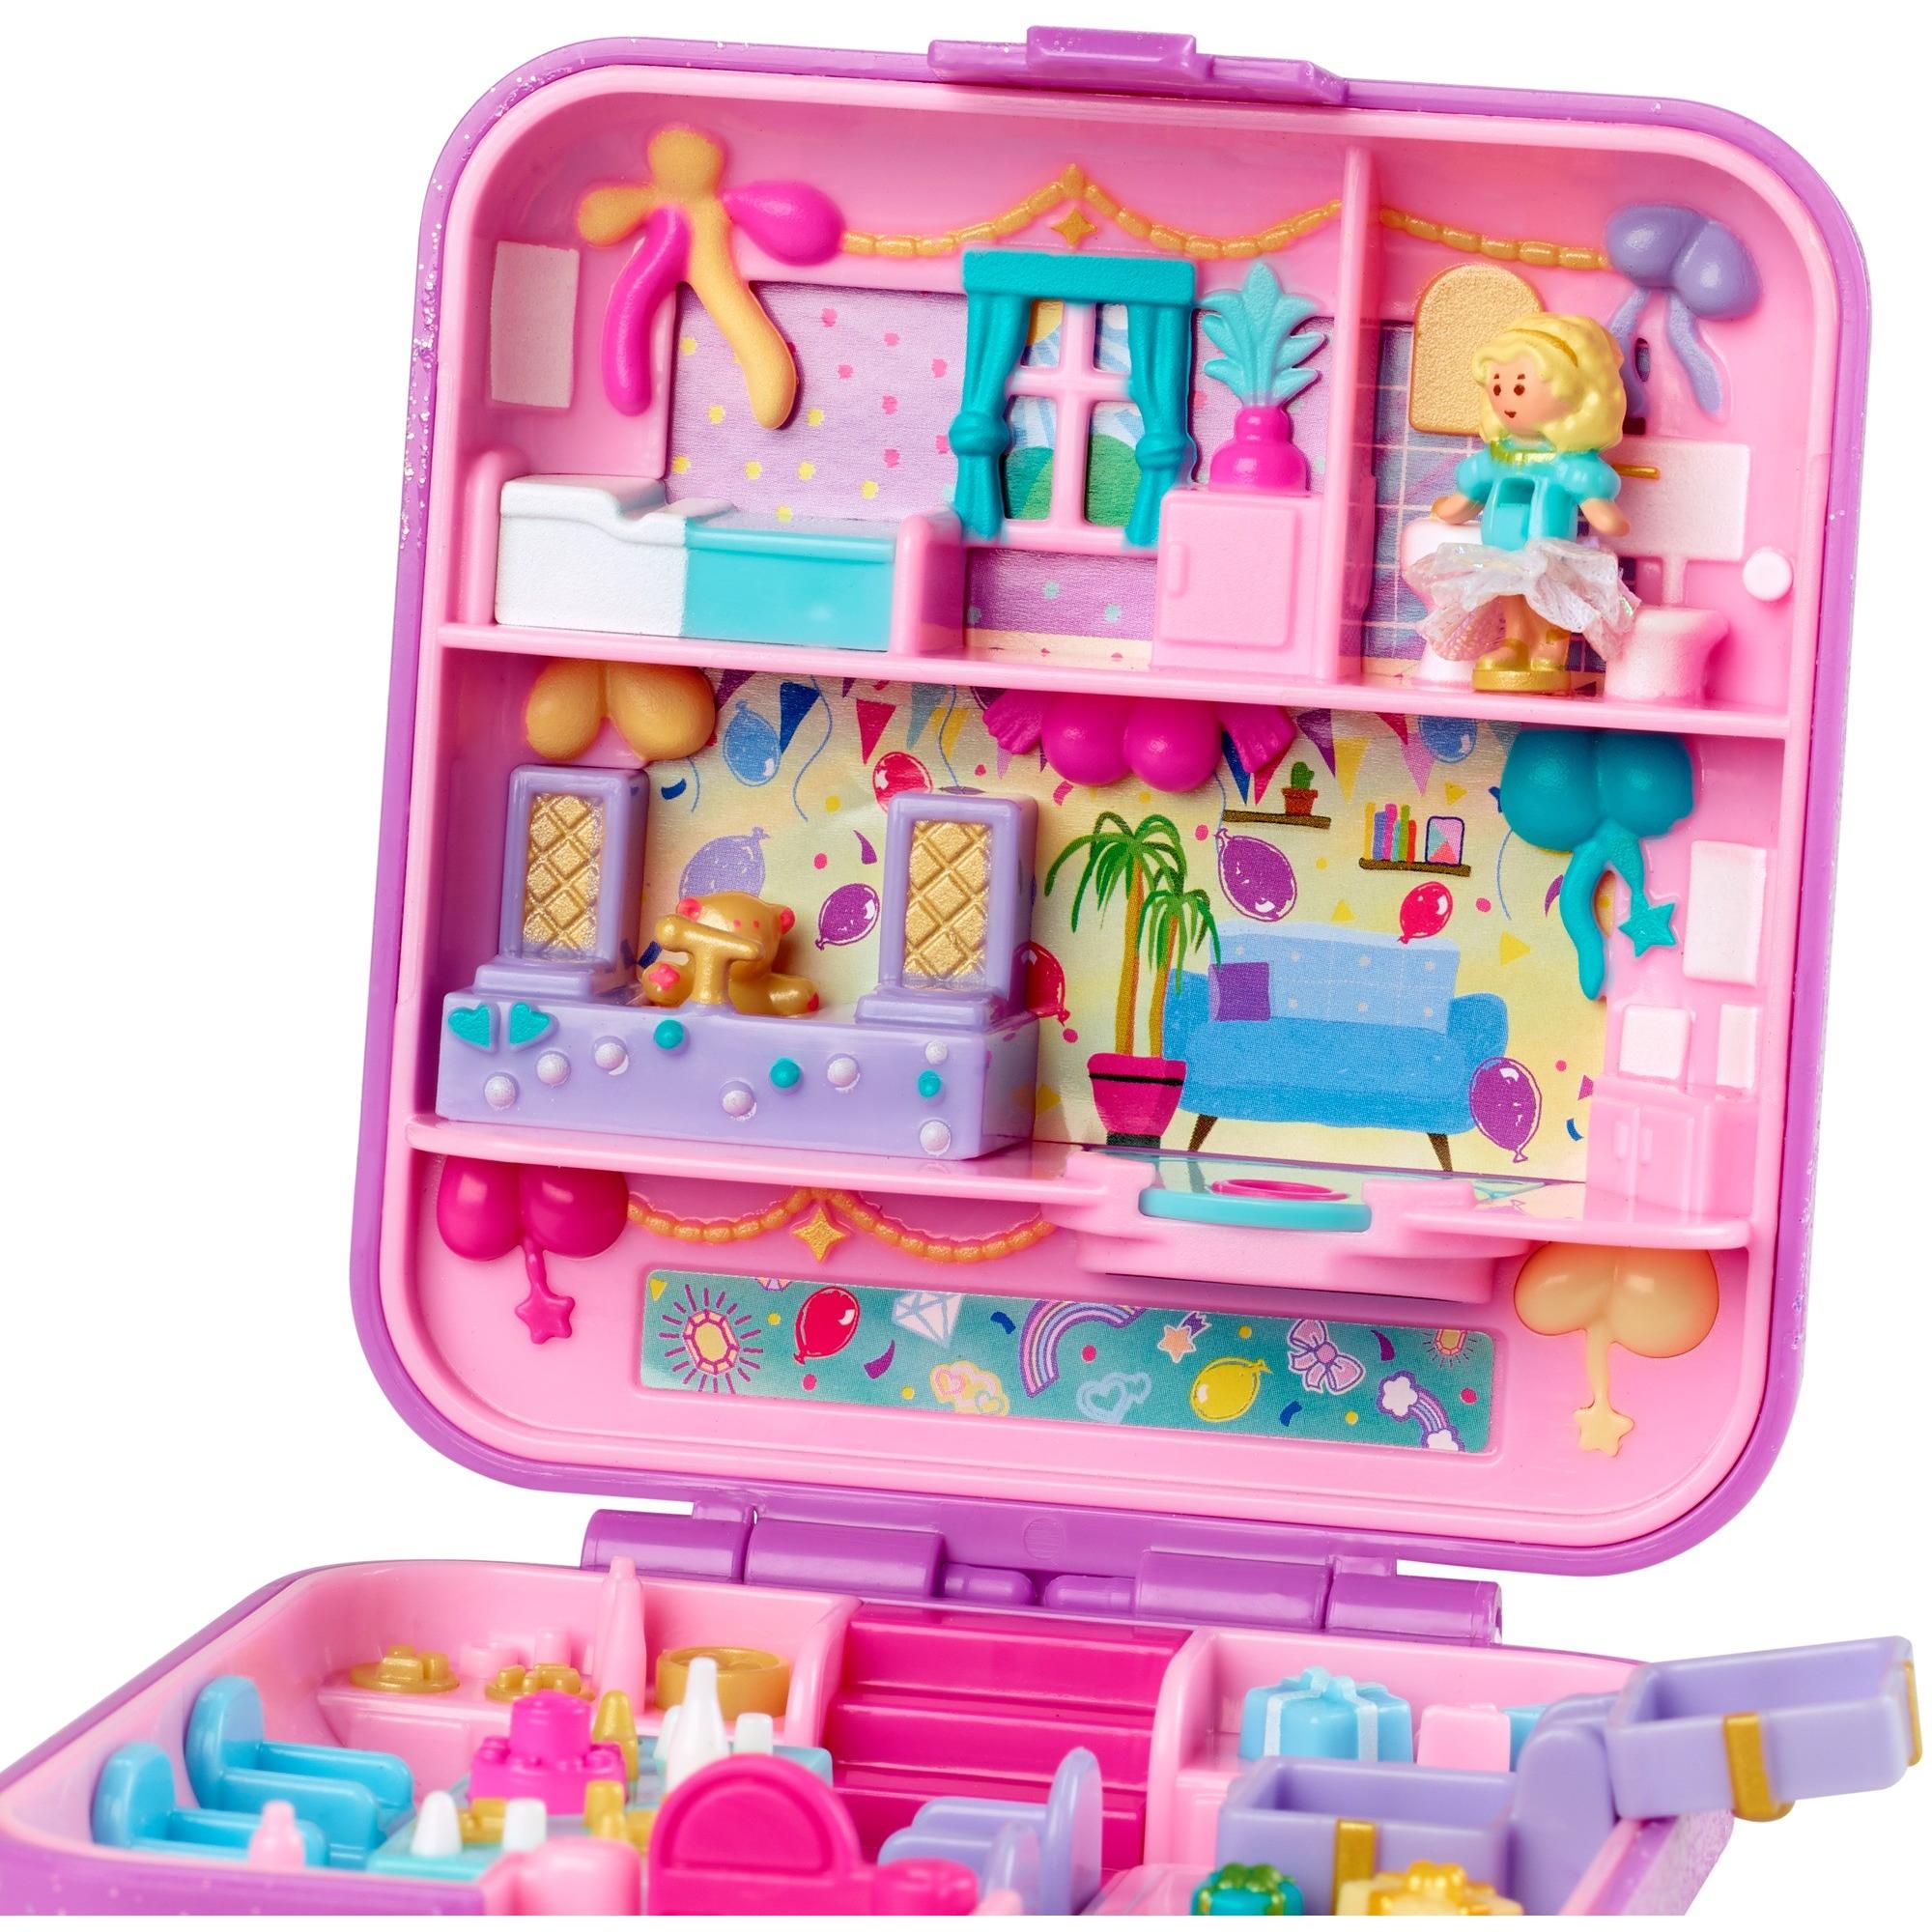 Polly Pocket Partytime Surprise Keepsake 30th Anniversary Compact - image 3 of 6